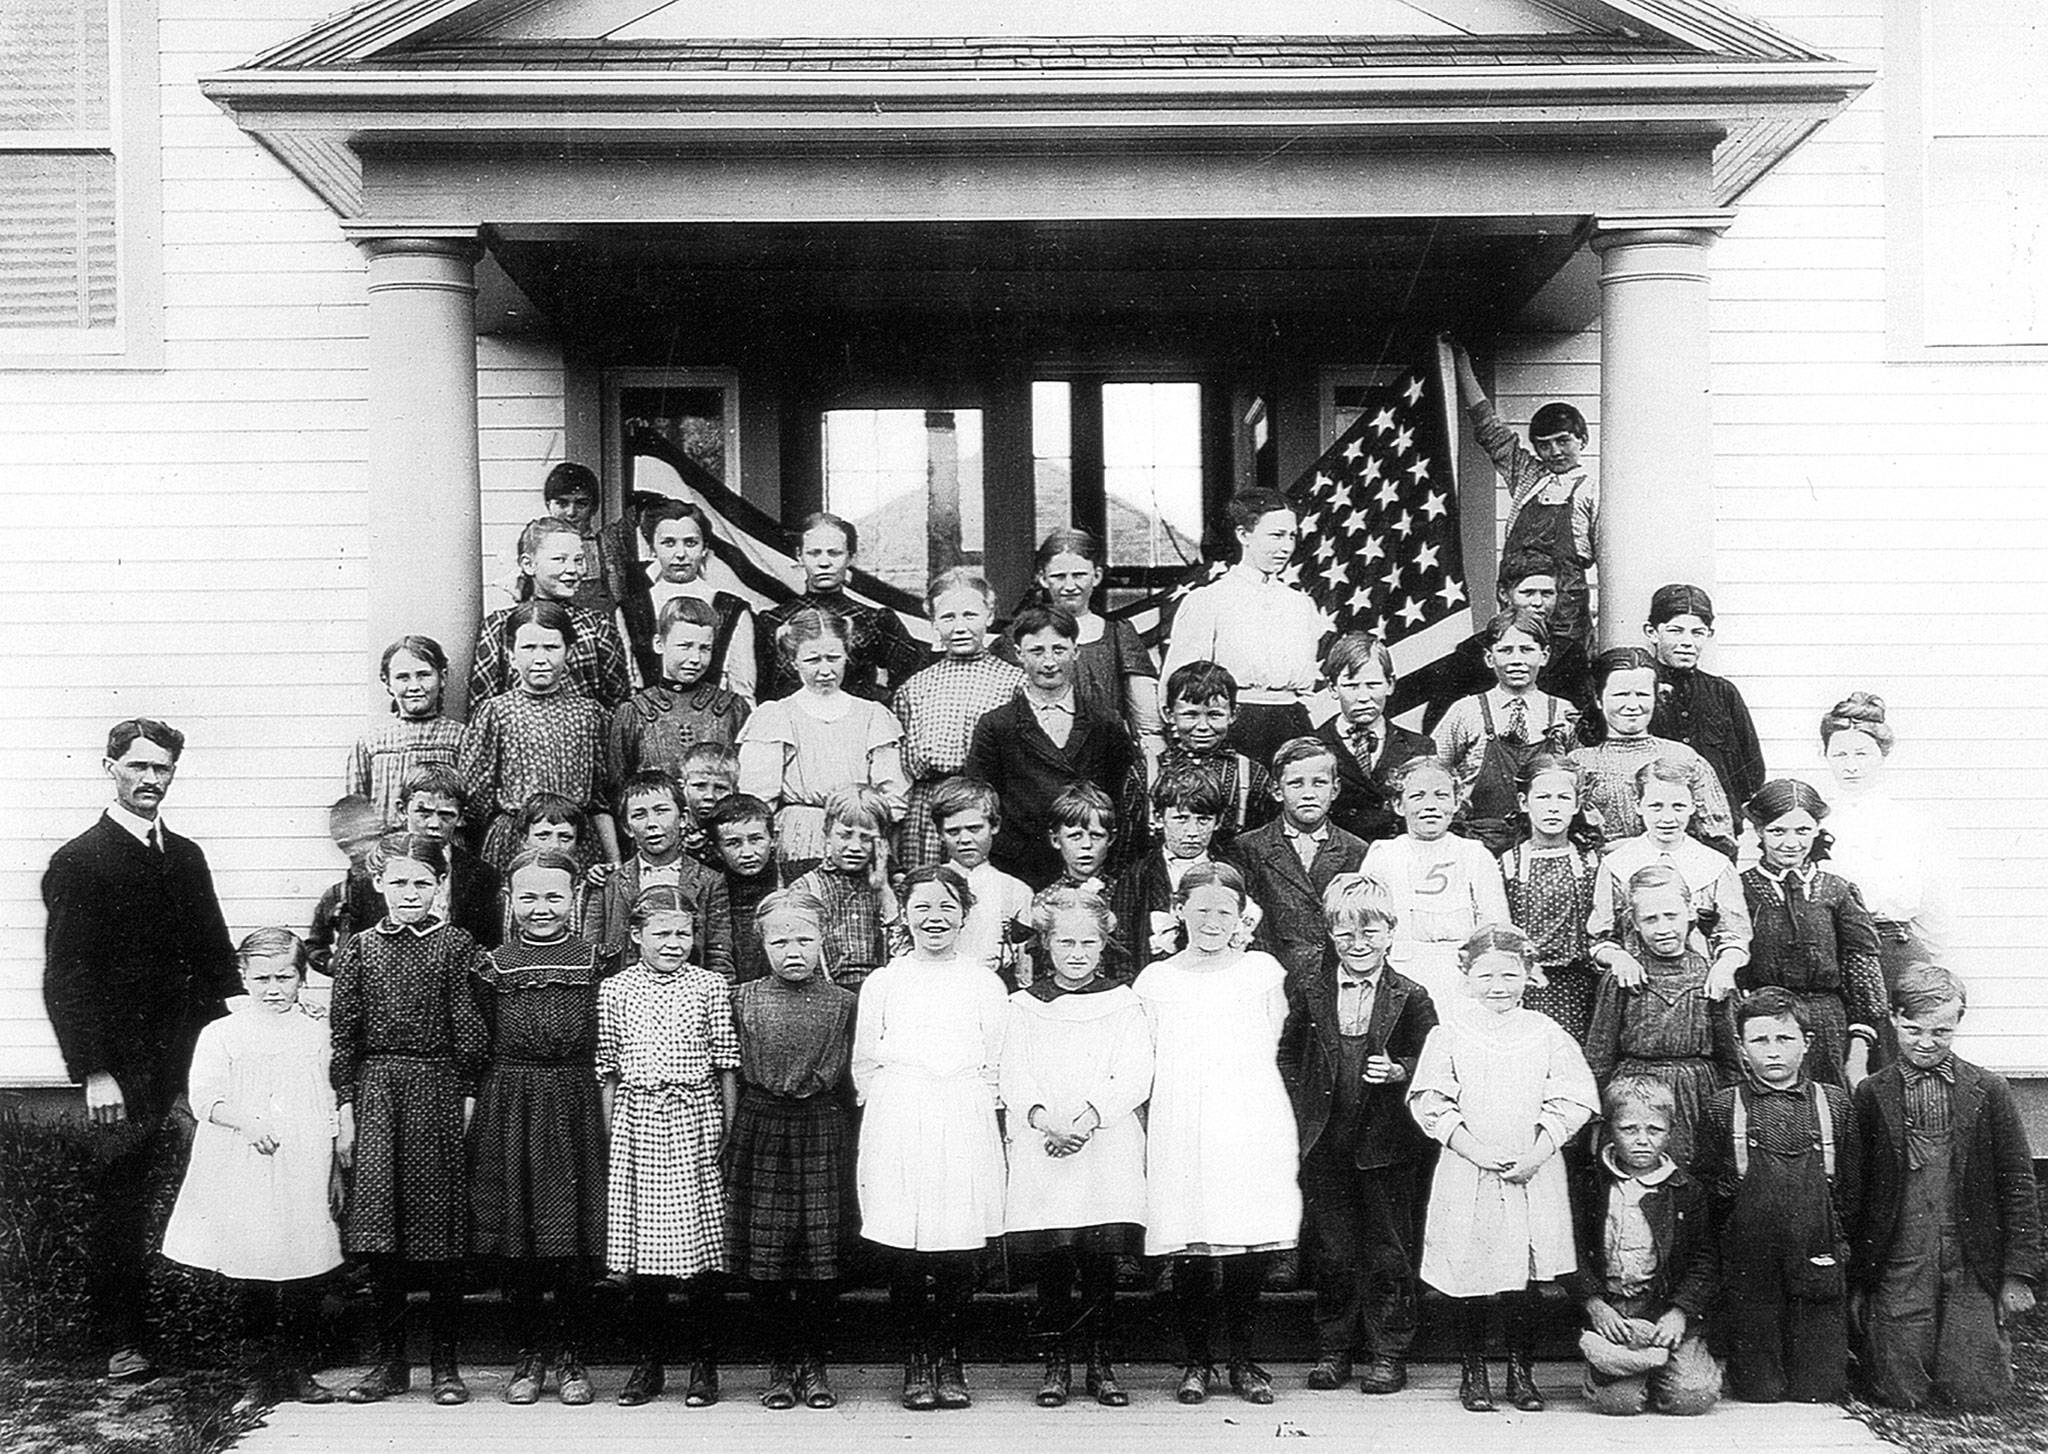 The Silvana School and its pupils in 1908. (Courtesy of Robin Monson Sather. Published in “Early Stillaguamish Valley Schools” by the Stillaguamish Valley Genealogical Society)